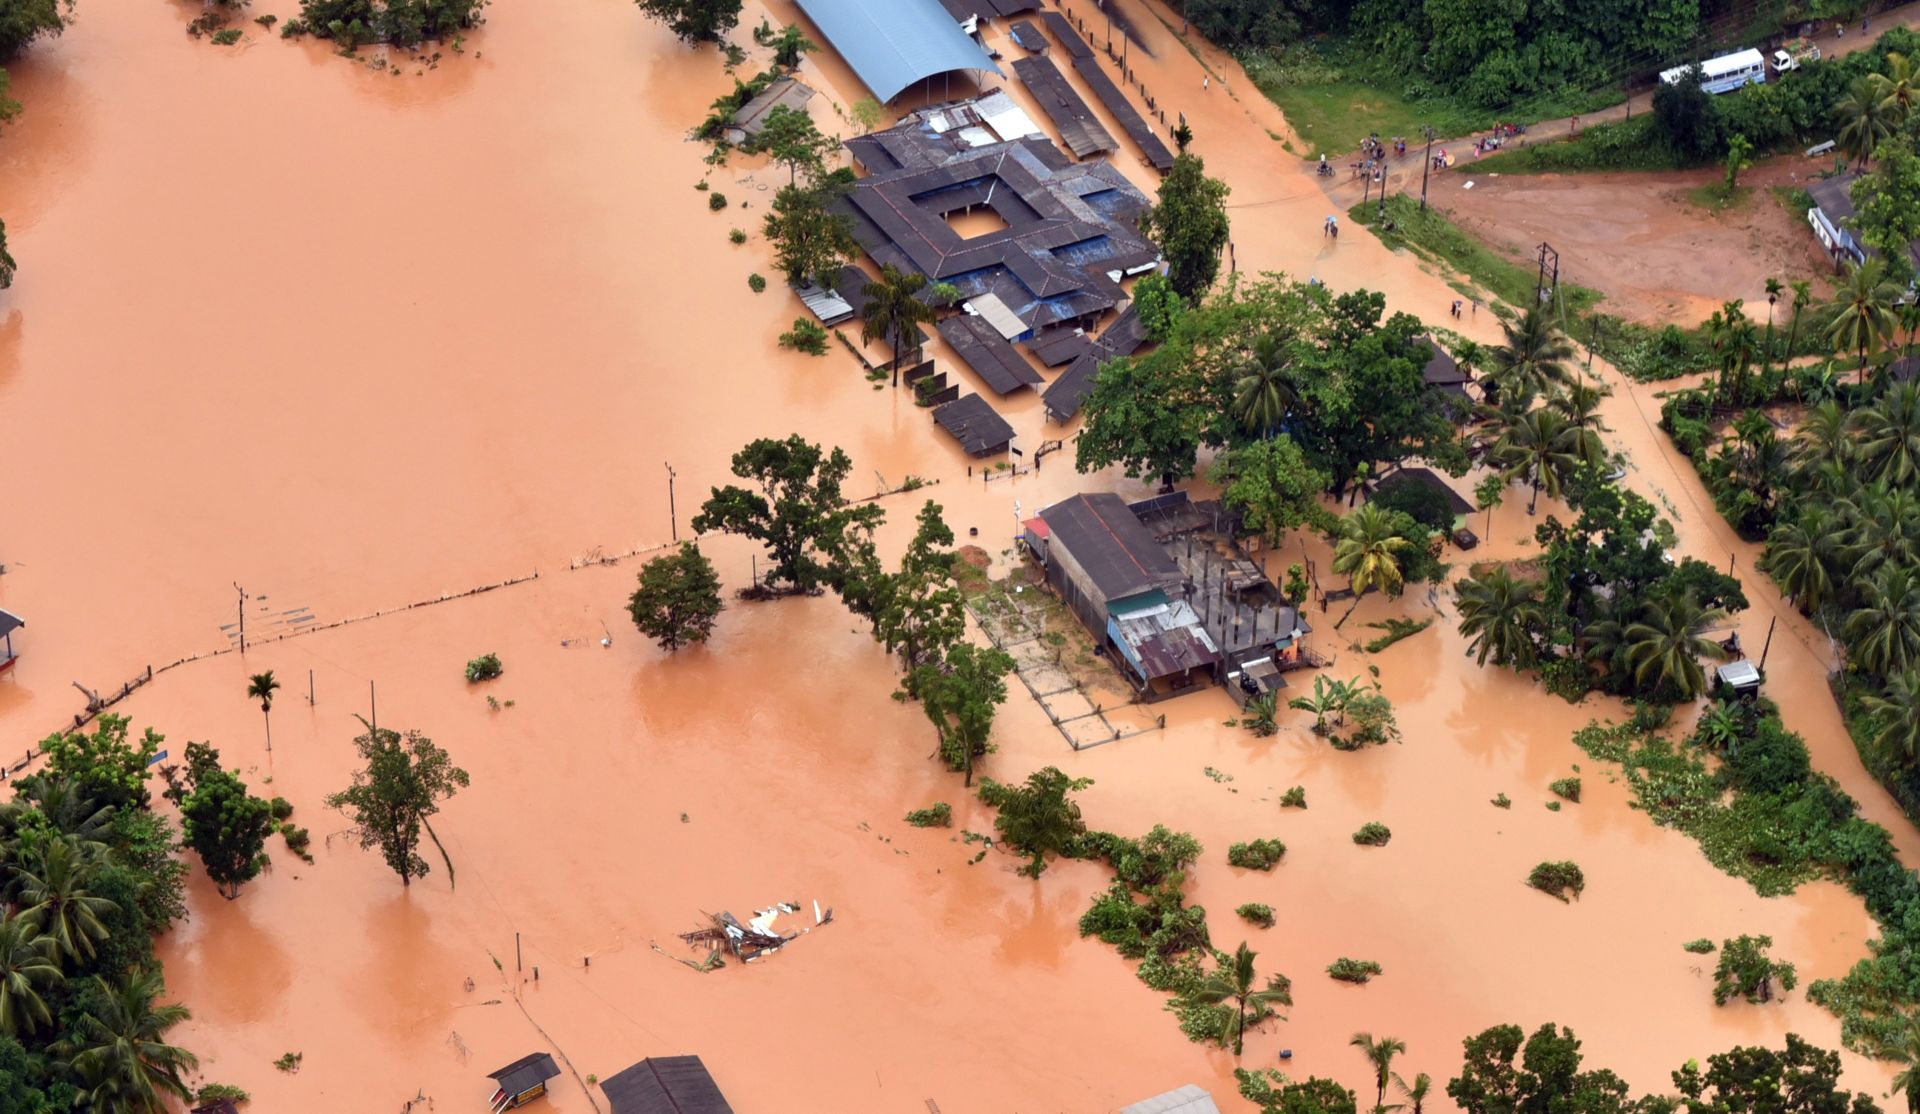 epa05991786 A handout photo made available by the Air Force Media division shows a flooded area at Kaluthara 80 kms from Colombo, Sri Lanka, 26 May 2017. Following a prolonged drought, Sri Lanka has been hit with the monsoon rains for the past few days causing heavy flooding and landslides in several parts of the island including its capital Colombo. The government's Disaster Management Centre confirmed, 26 May 2017, that 91 deaths have been reported while 110 are missing and 53,114 have been displaced.  EPA/SRI LANKA AIR FORCE / HANDOUT  HANDOUT EDITORIAL USE ONLY/NO SALES